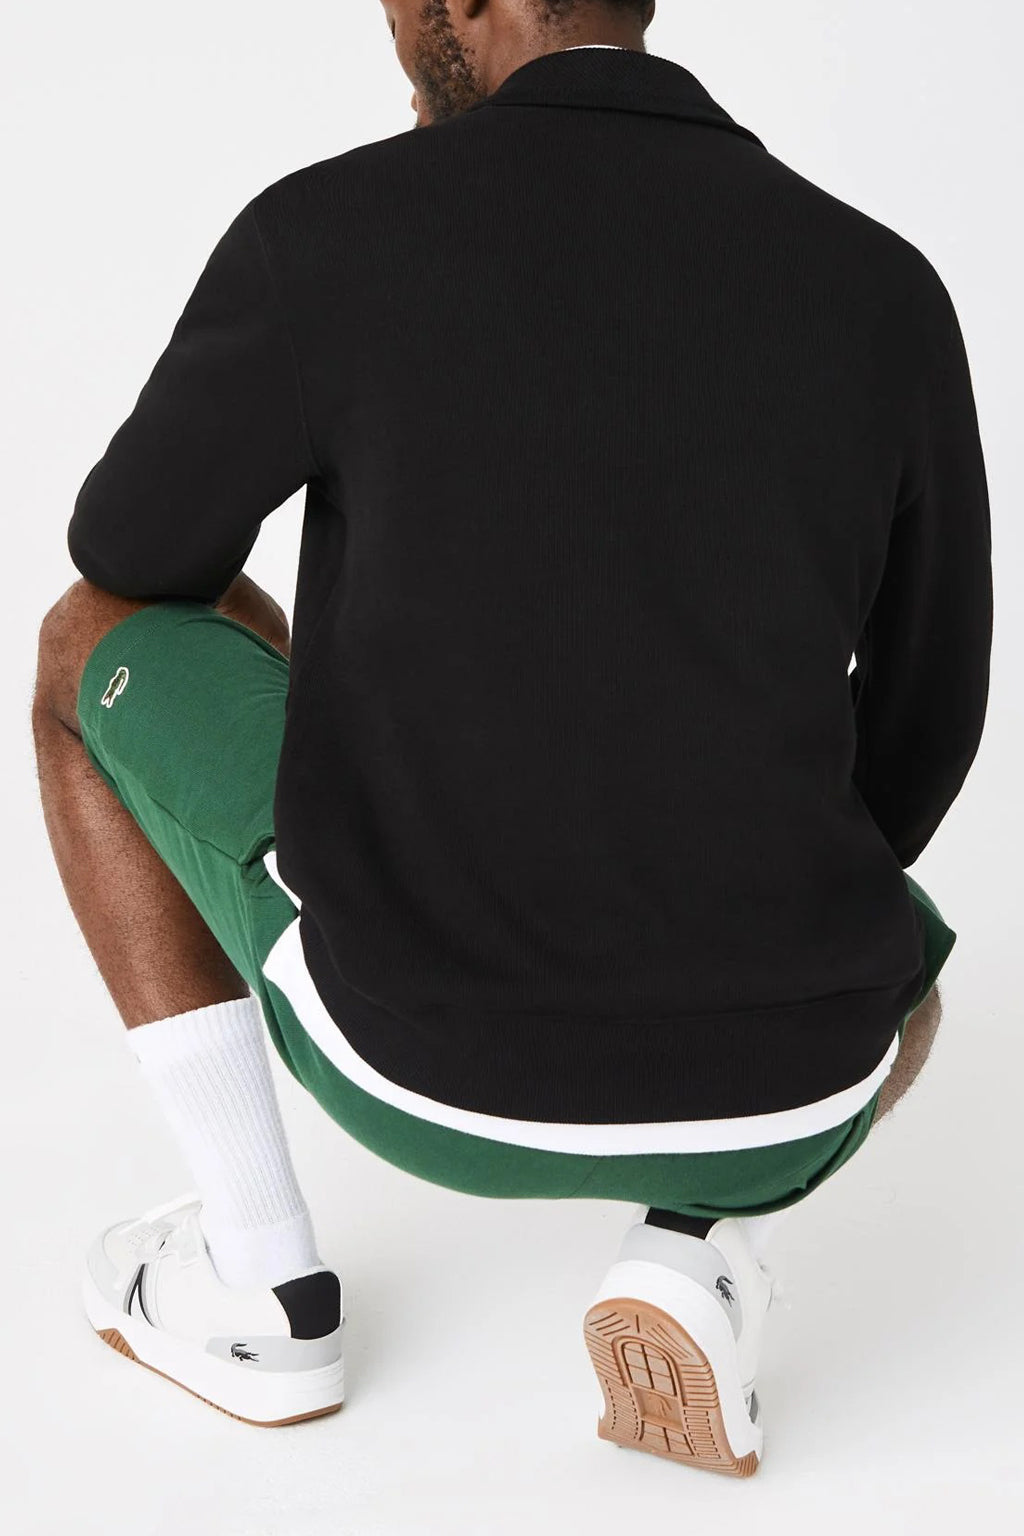 Lacoste - Cotton Sweatshirt With a Stand-up Zipper